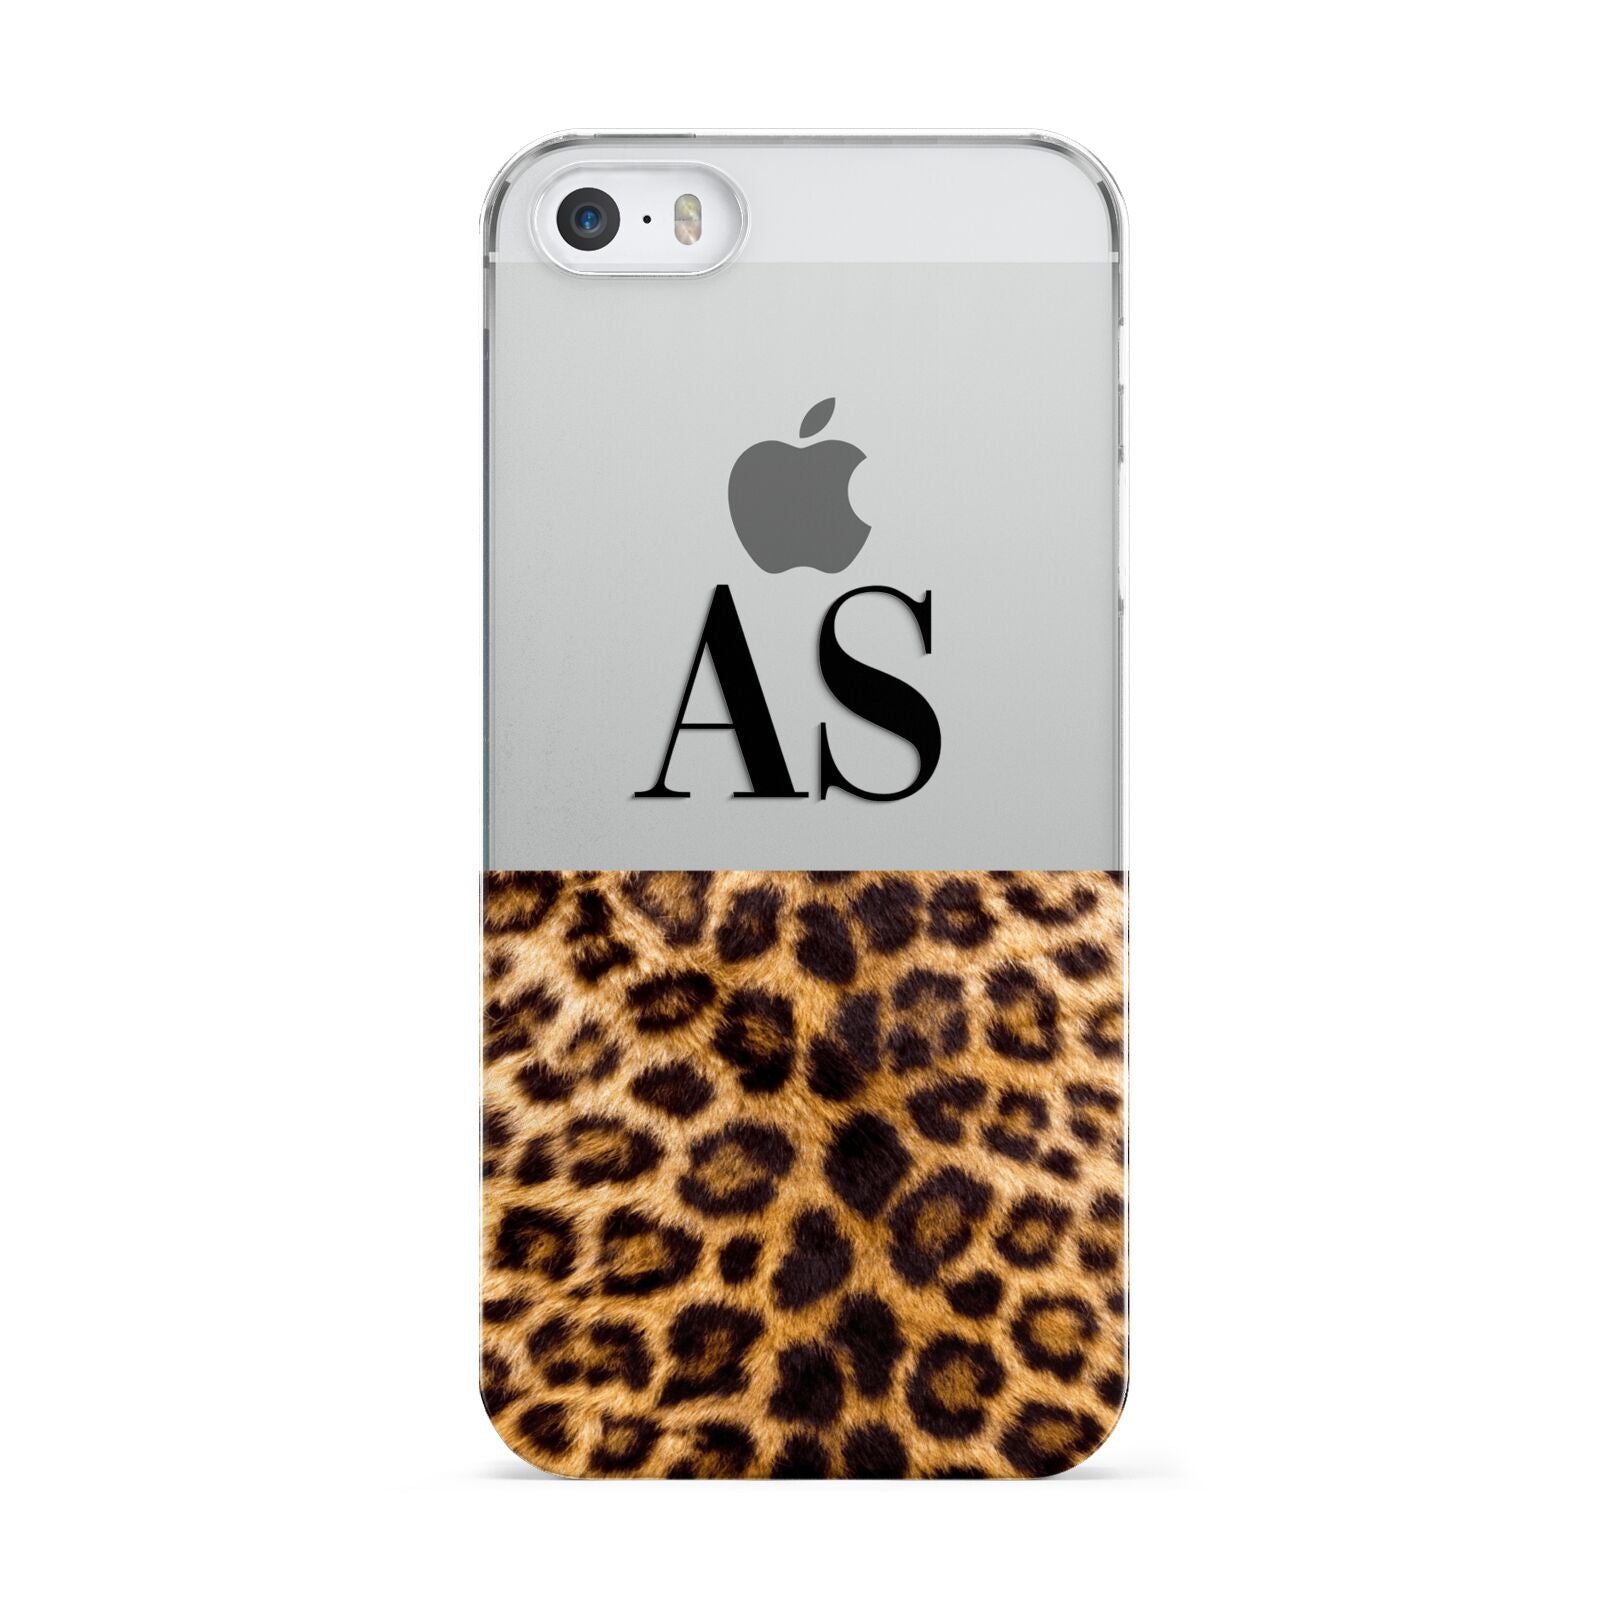 Initialled Leopard Print Apple iPhone 5 Case